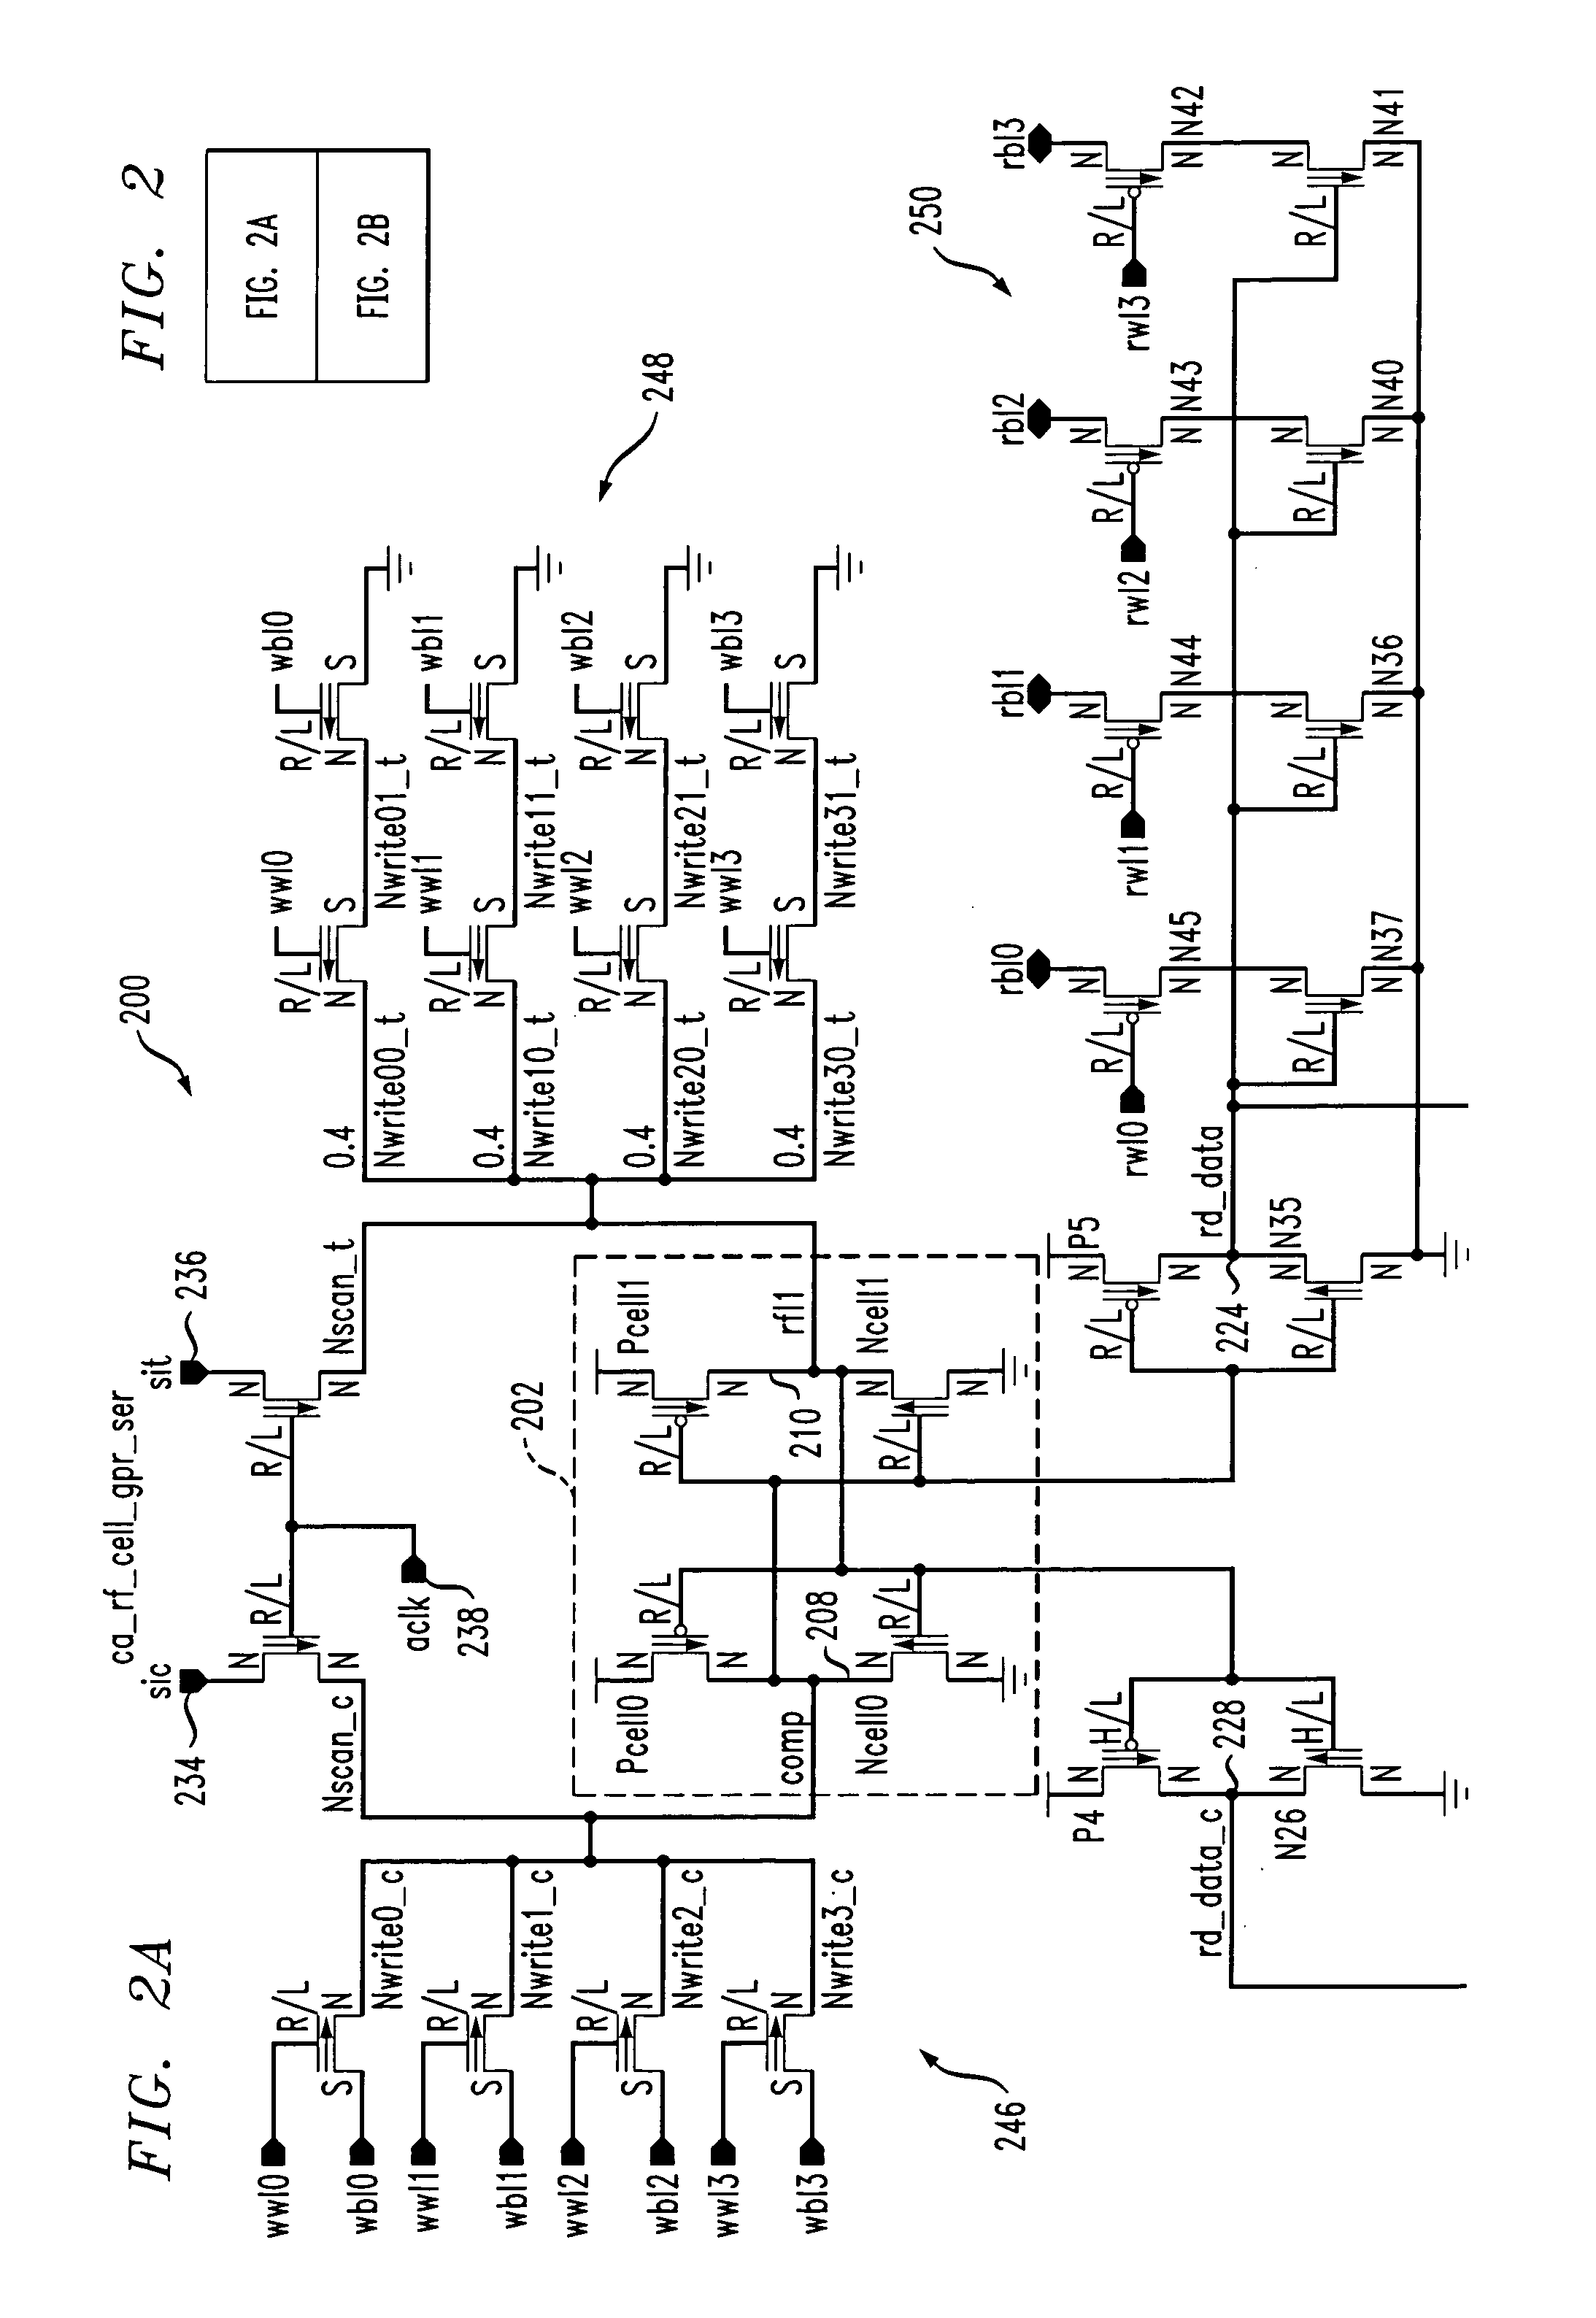 Register file cell with soft error detection and circuits and methods using the cell